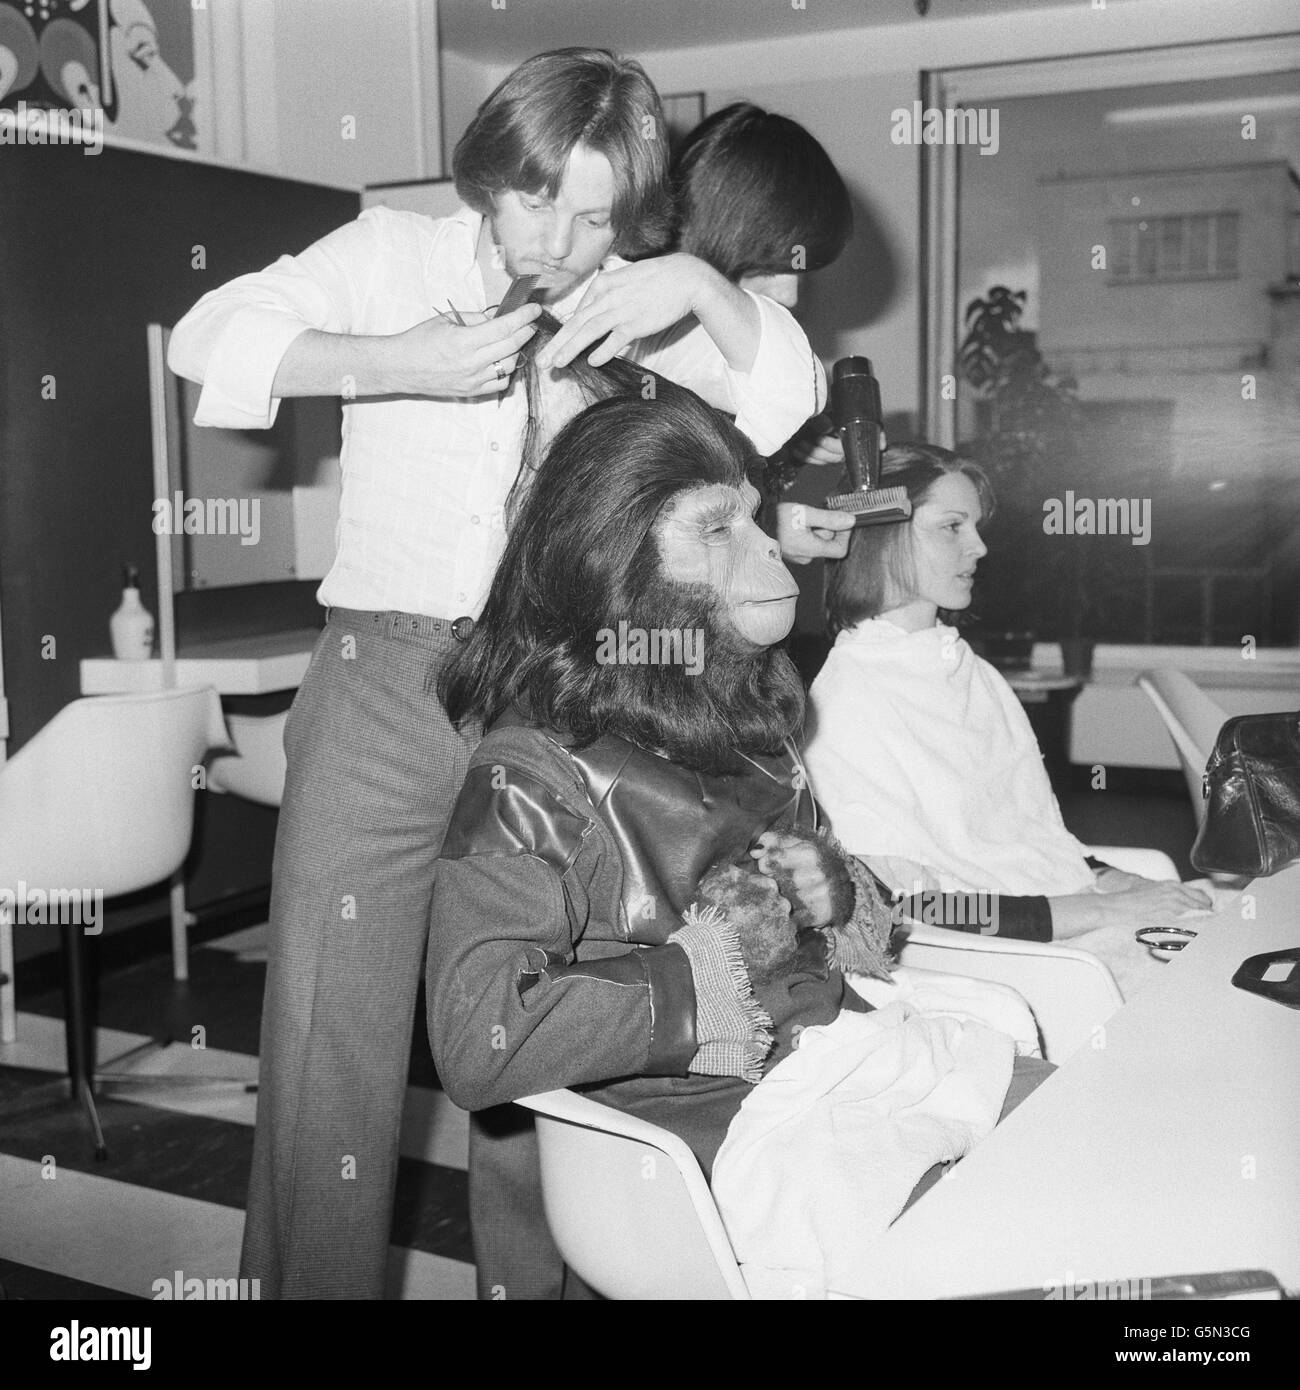 Hairdresser Paul Kelly tends to Planet of the Apes character Galen, who is one of the attractions in the children's department of an Oxford Street store leading up to Christmas. Stock Photo